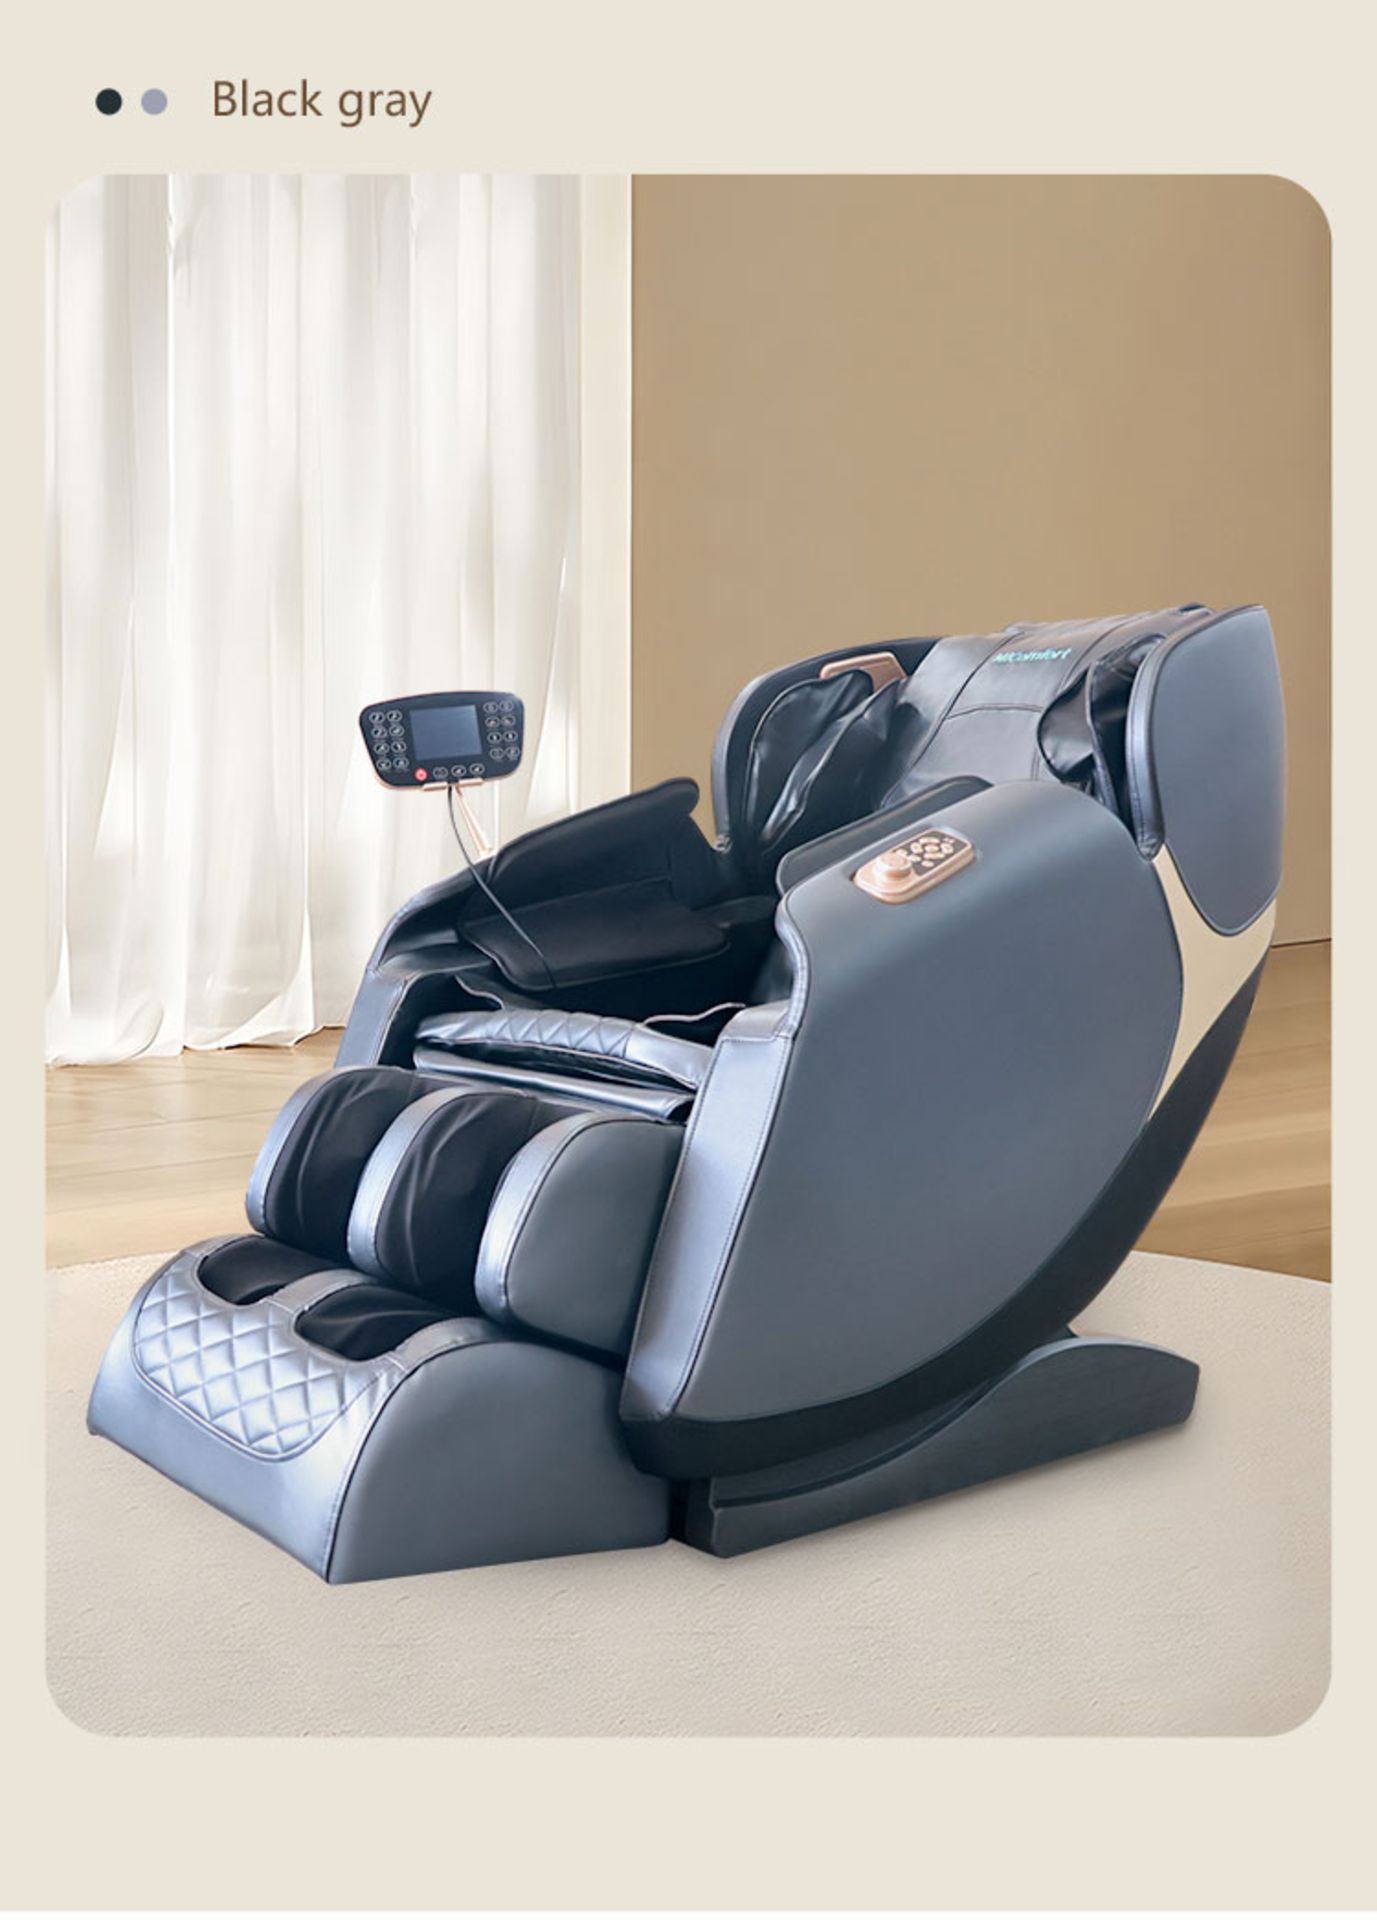 Brand New in Box Orchid Blue/Black MiComfort Full Body Massage Chair RRP £2199 *NO VAT* - Image 2 of 14